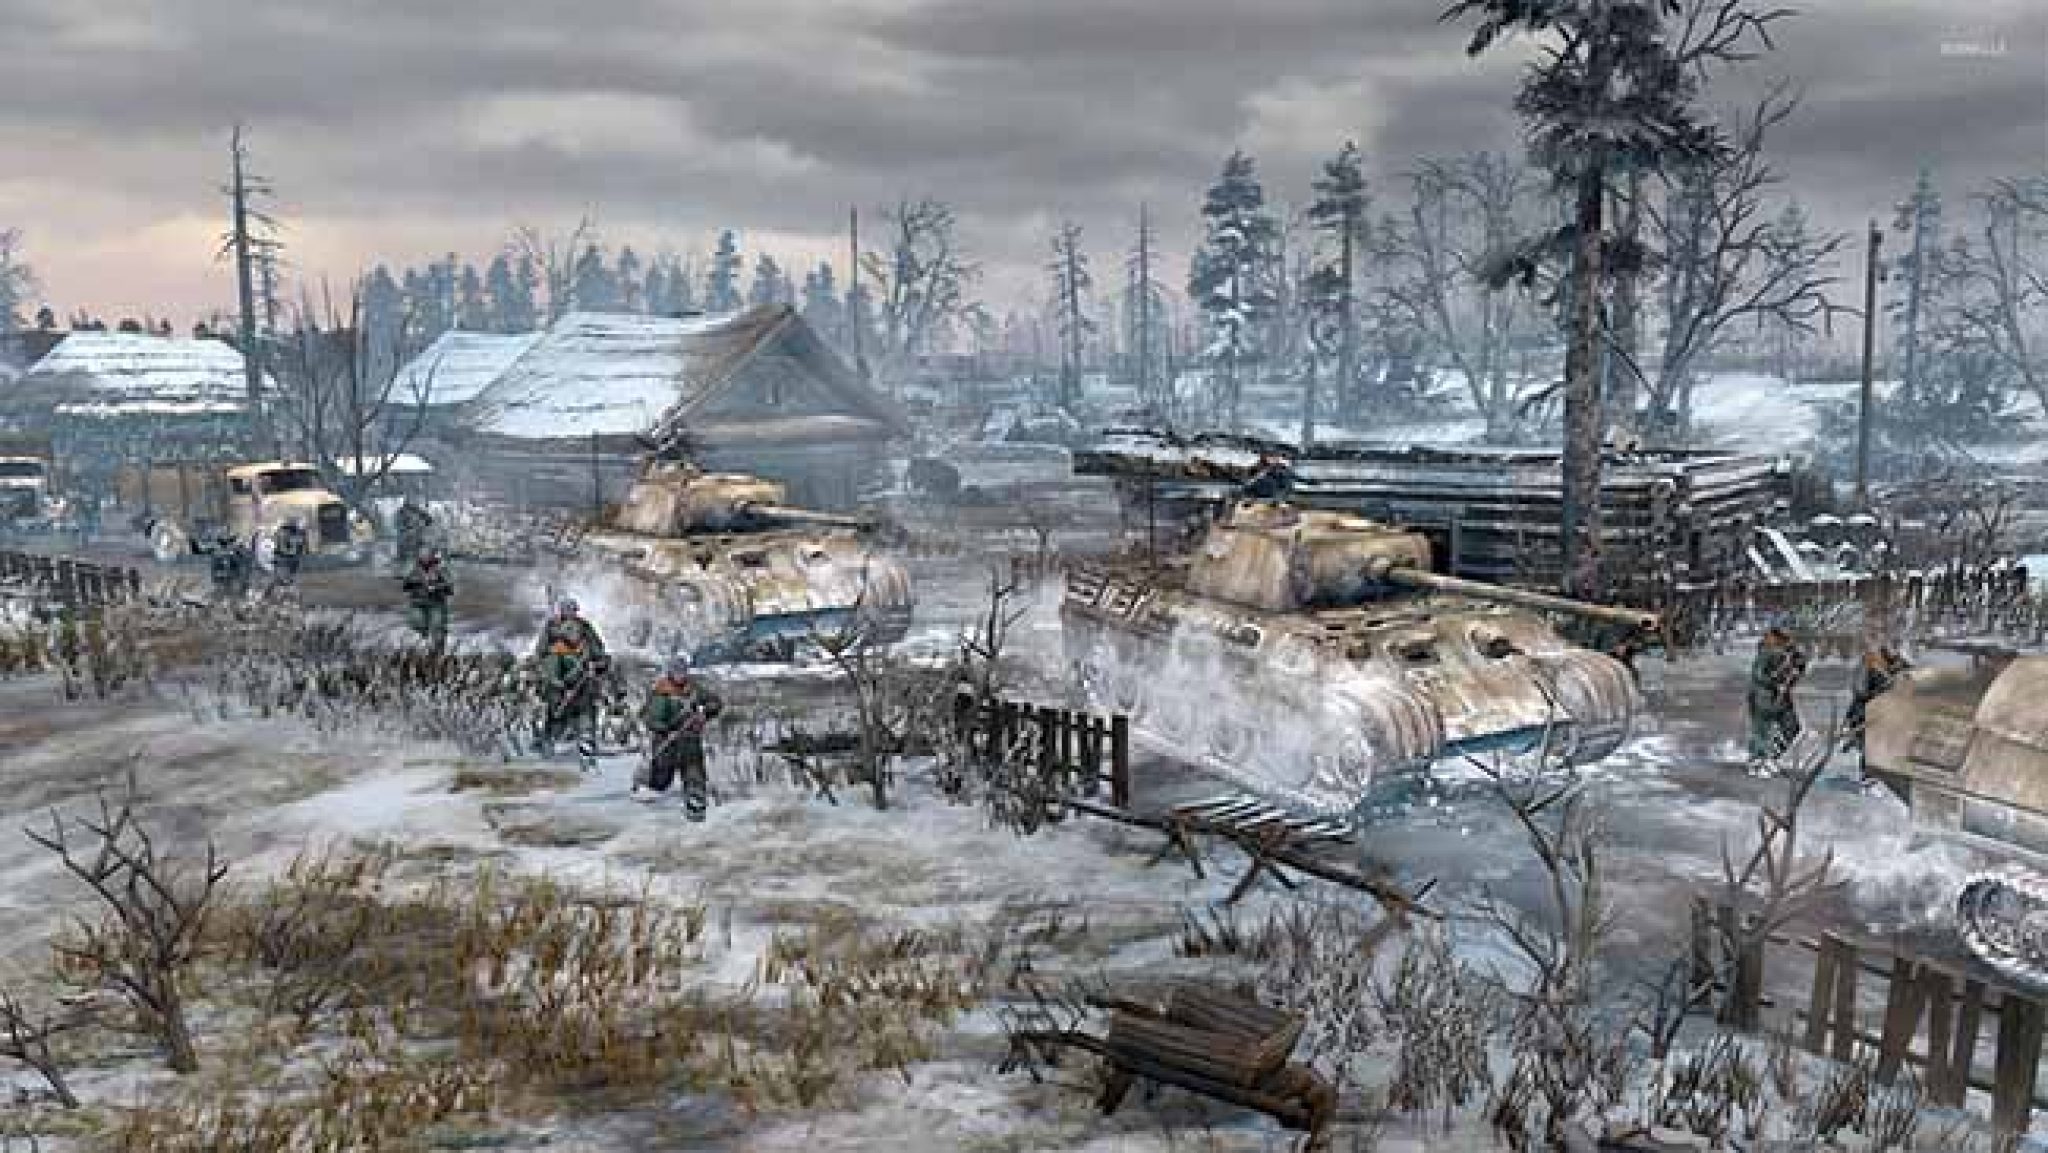 Download company of heroes 3